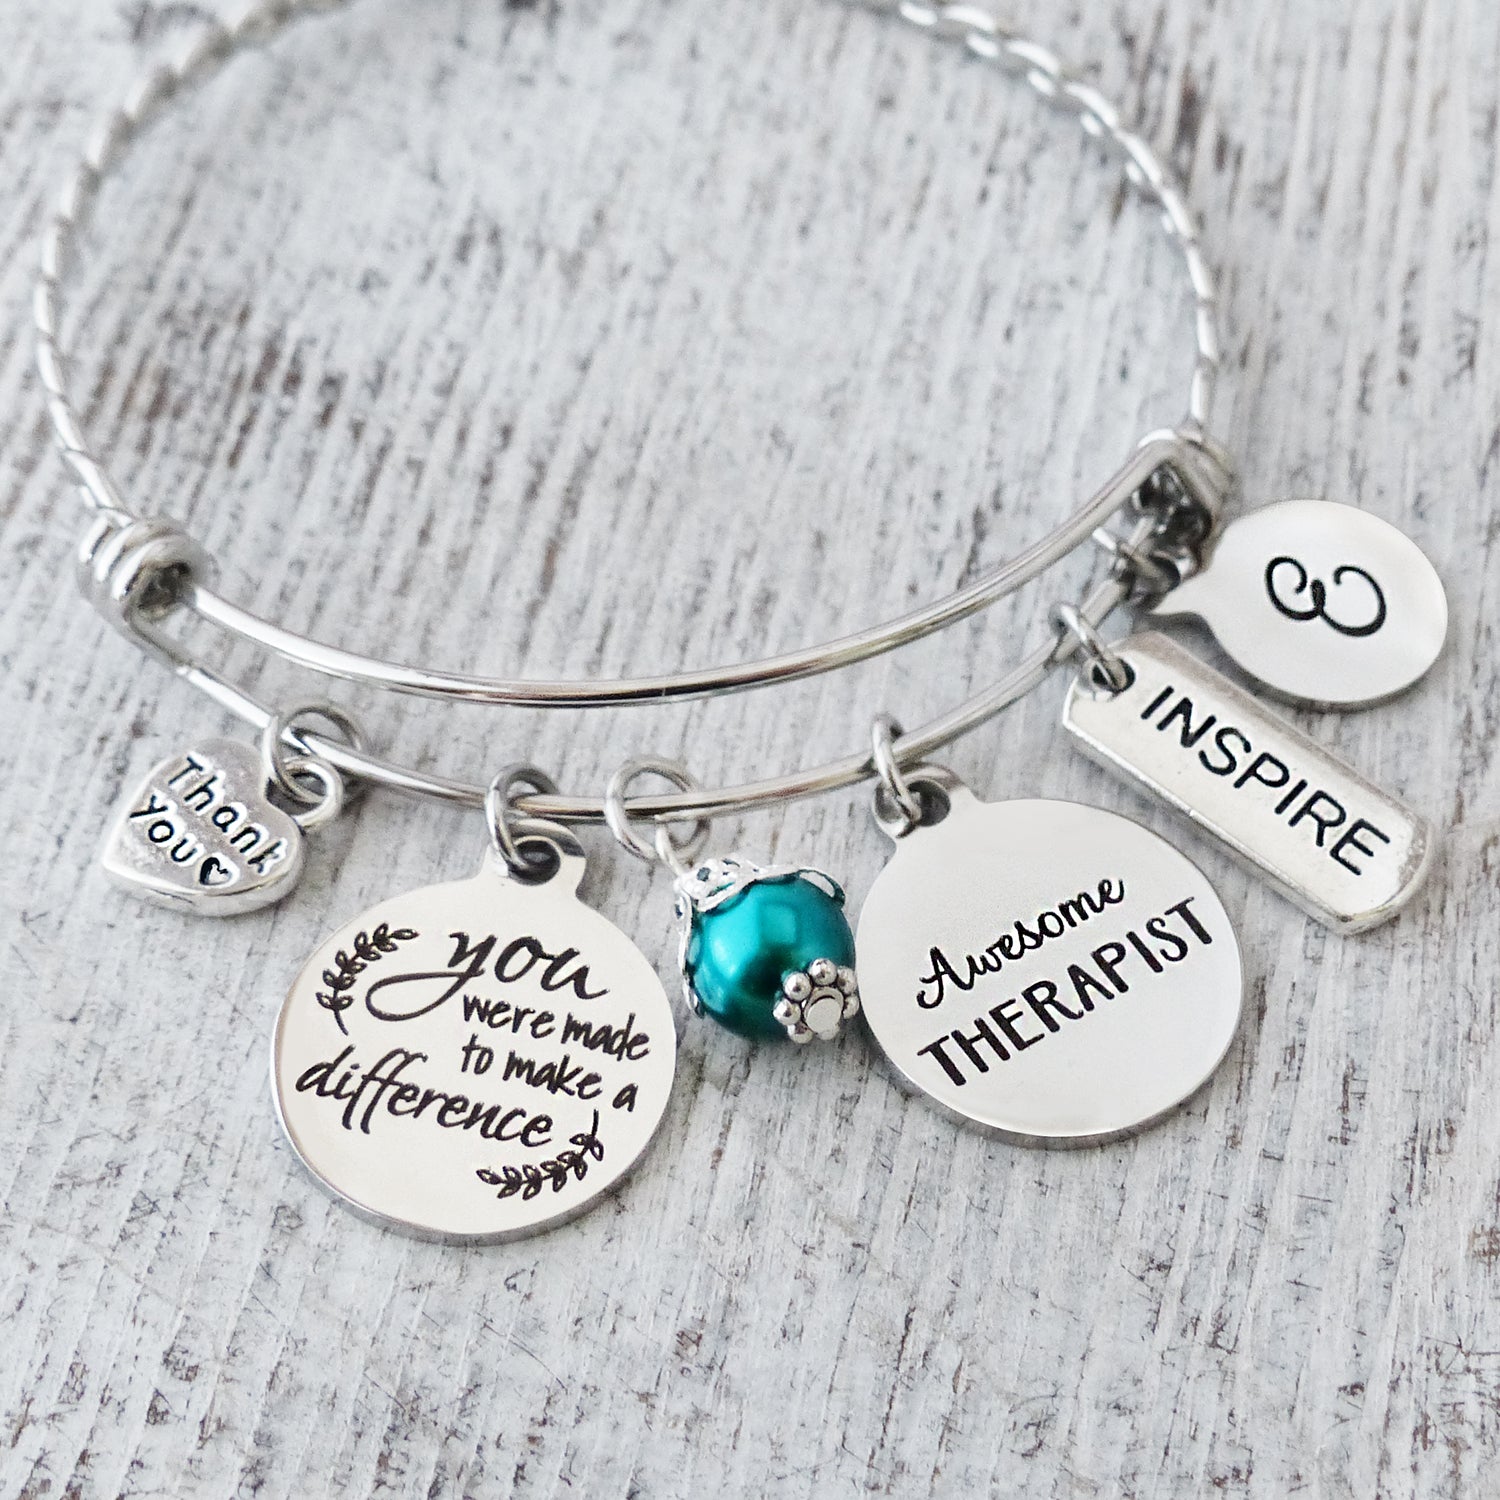 Therapist Gifts, Thank you Bracelet, Occupational Therapy Gifts, Letter Bangle Bracelet-Jewelry, Occupational Therapist-Therapist Gift, PT OT Speech